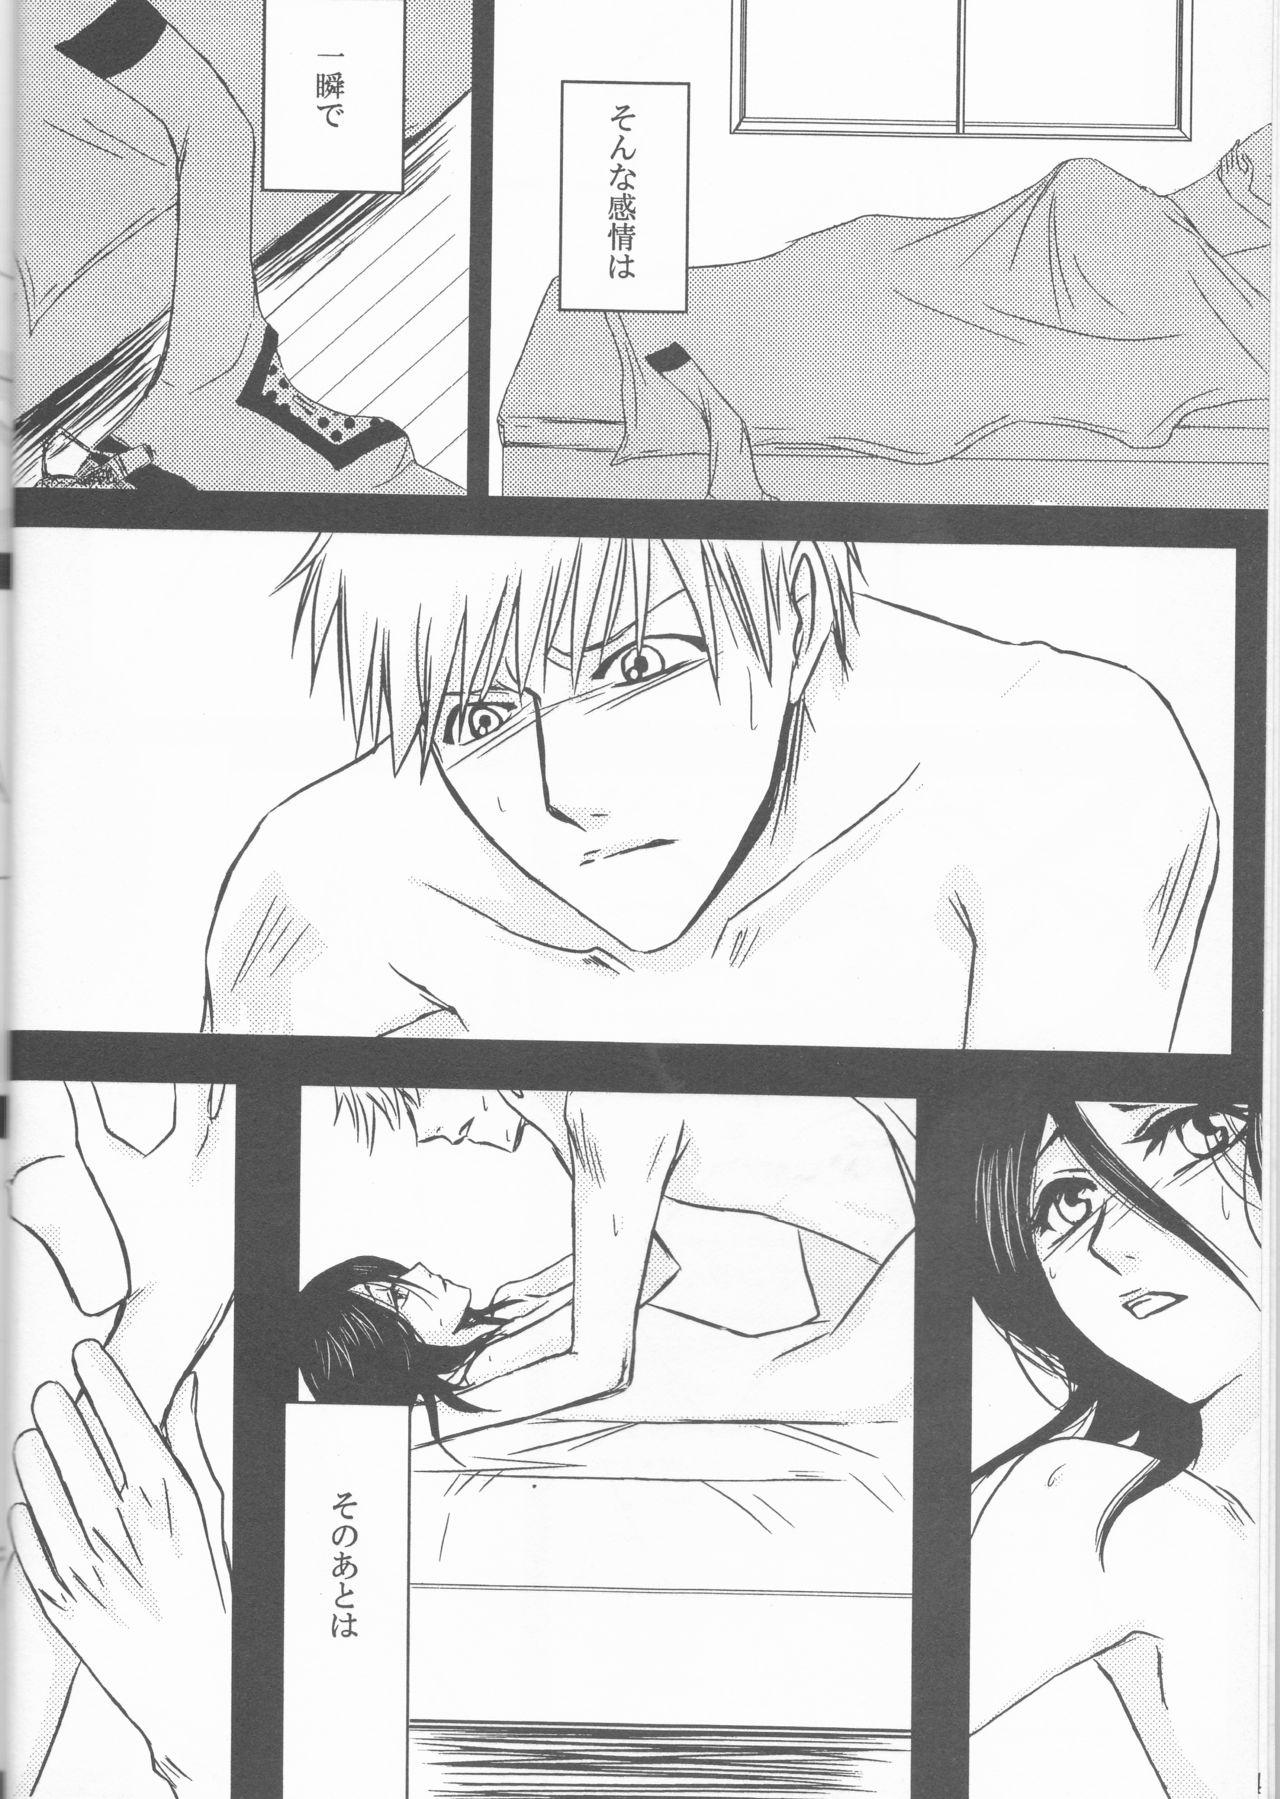 Cocksuckers Neo Melodramatic 2][bleach) - Bleach Hot Girl Pussy - Page 6